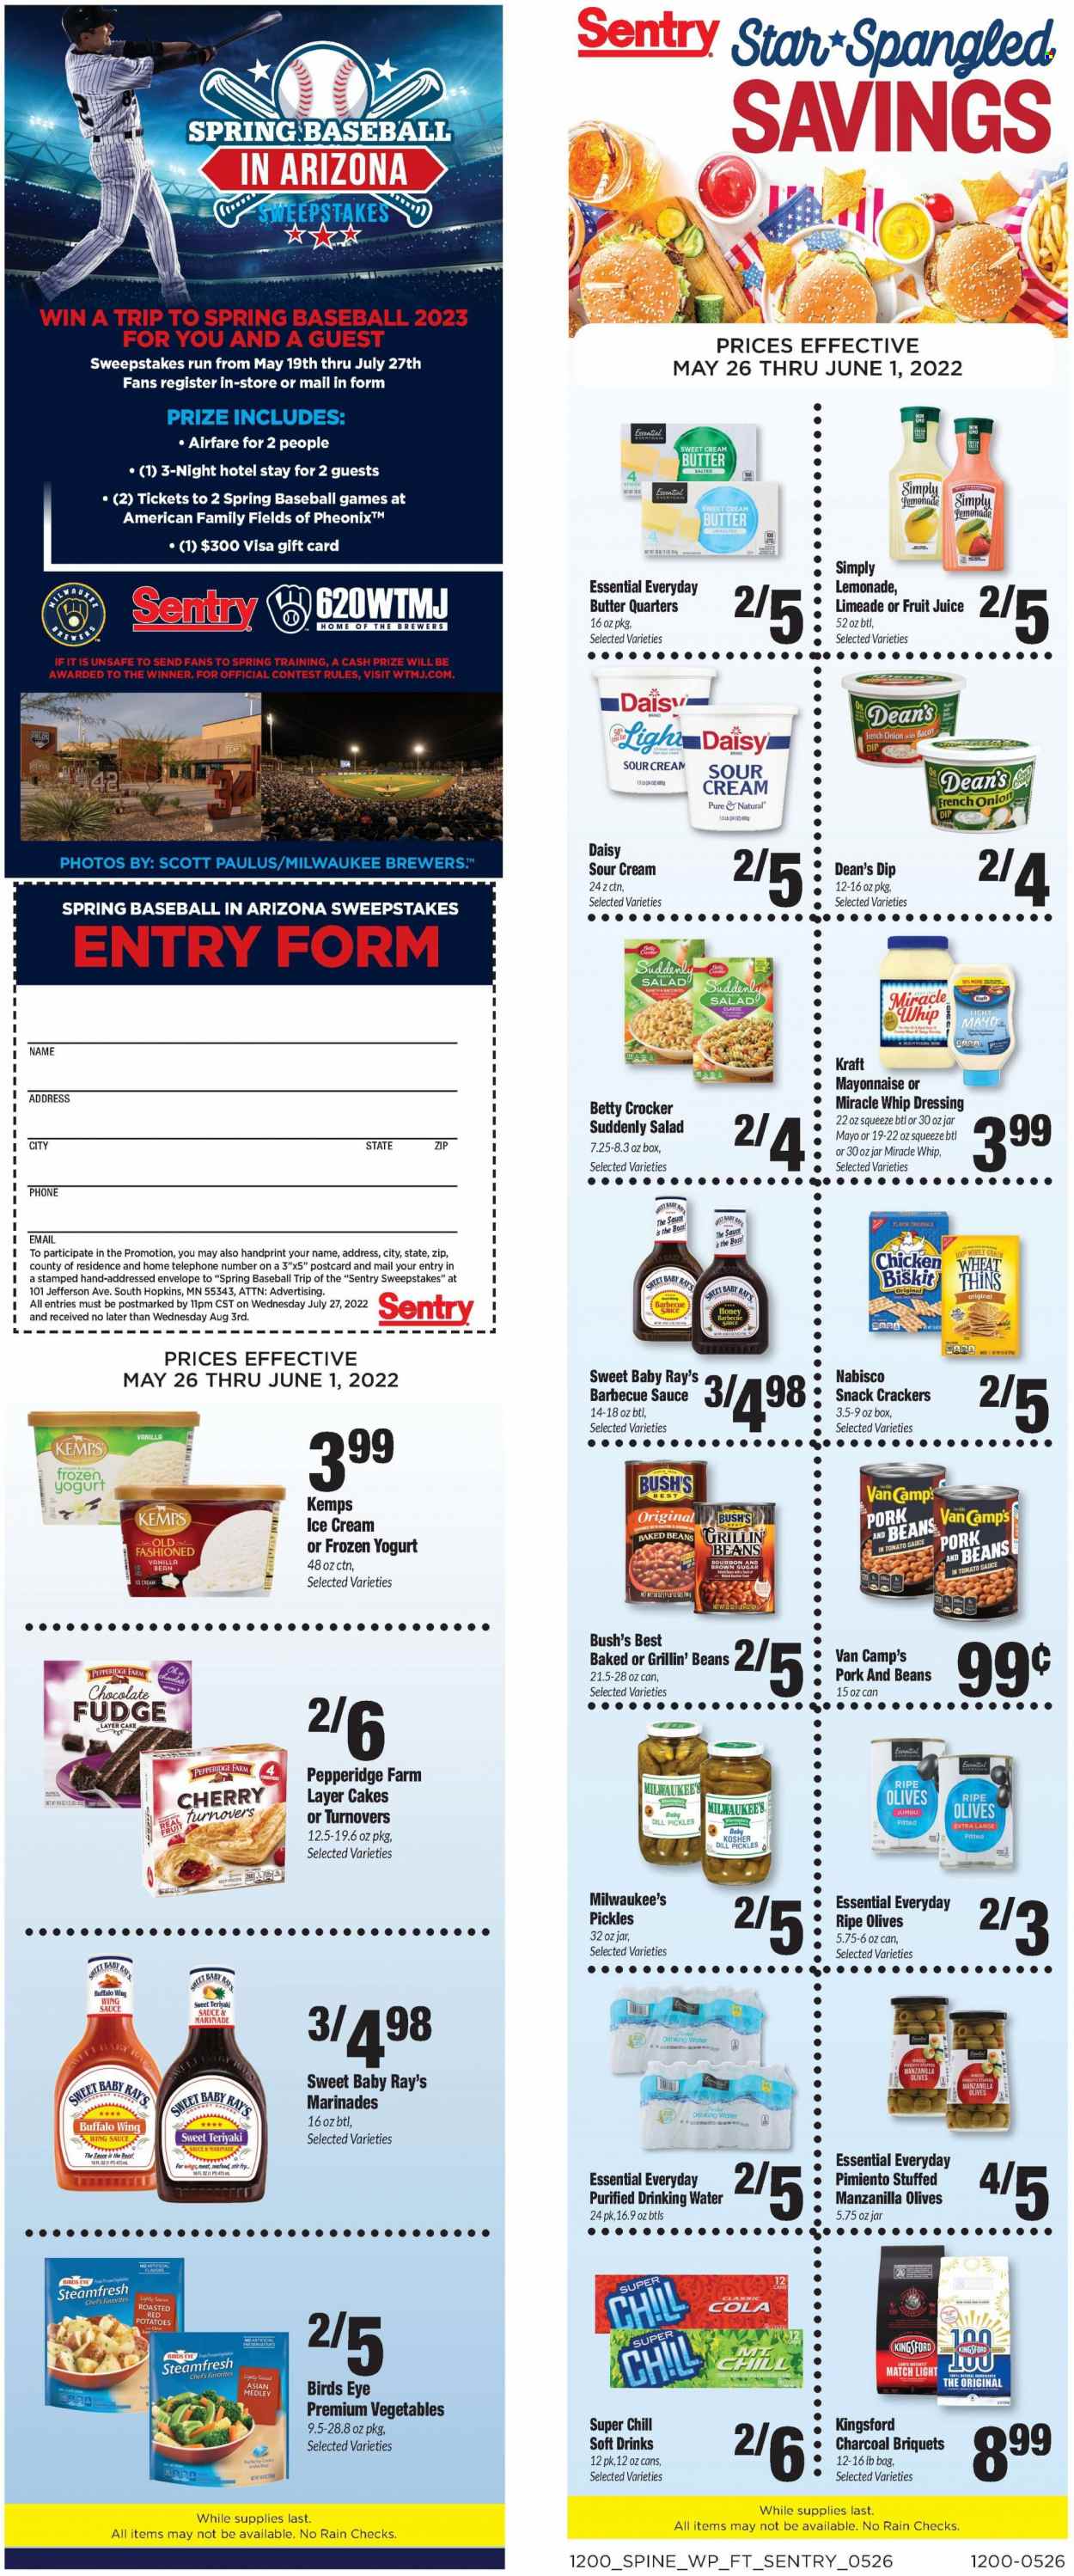 thumbnail - Sentry Foods Flyer - 05/26/2022 - 06/01/2022 - Sales products - turnovers, potatoes, red potatoes, cherries, seafood, Bird's Eye, Kraft®, Kemps, yoghurt, butter, sour cream, mayonnaise, Miracle Whip, frozen vegetables, fudge, snack, crackers, Thins, cane sugar, brewer, pickles, olives, baked beans, dill, BBQ sauce, dressing, marinade, teriyaki sauce, wing sauce, honey, lemonade, juice, fruit juice, soft drink, bourbon, Scott. Page 5.